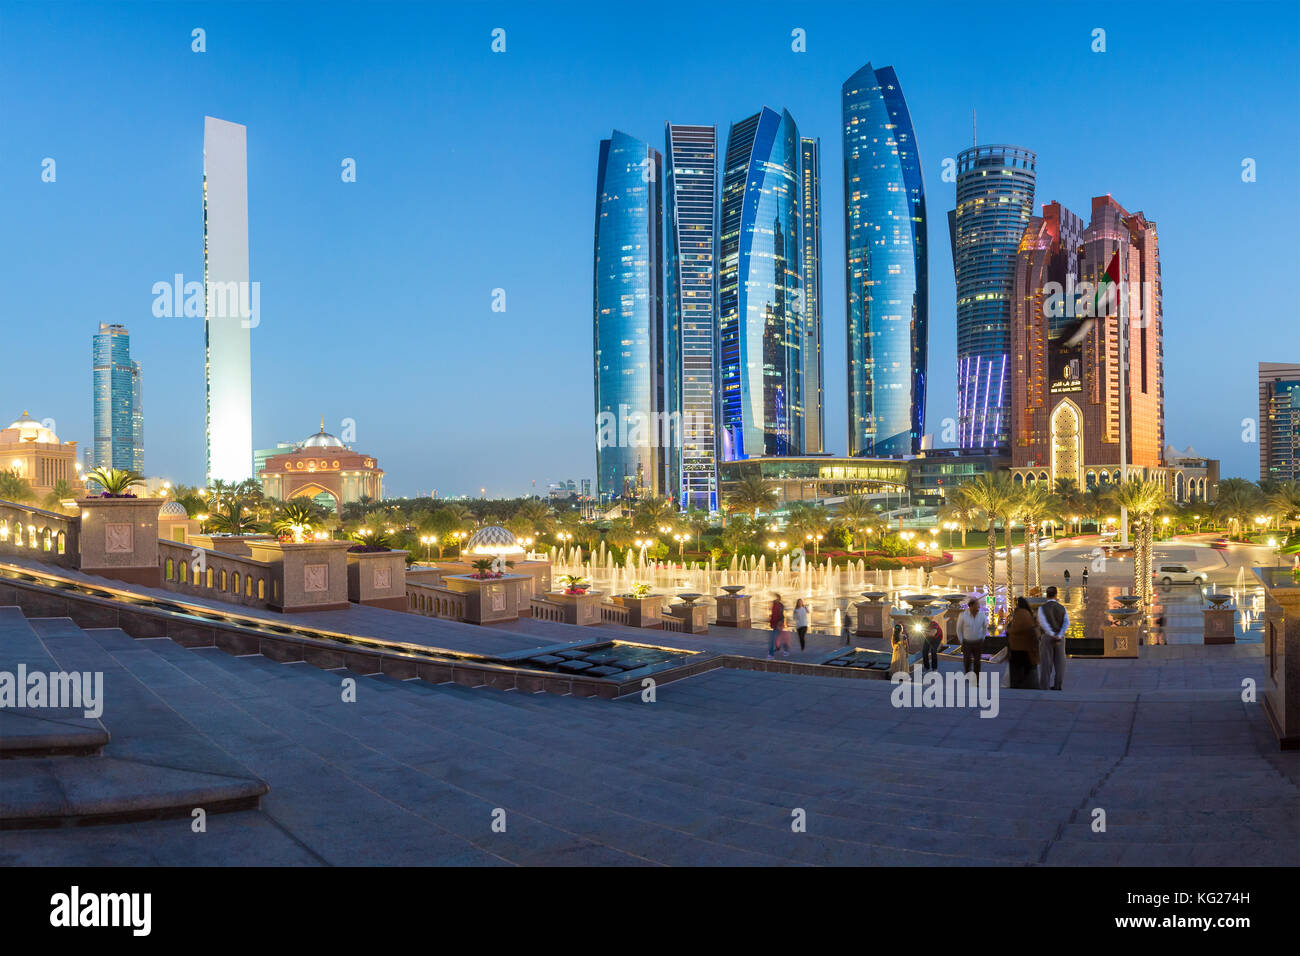 Etihad Towers viewed over the fountains of the Emirates Palace Hotel, Abu Dhabi, United Arab Emirates, Middle East Stock Photo